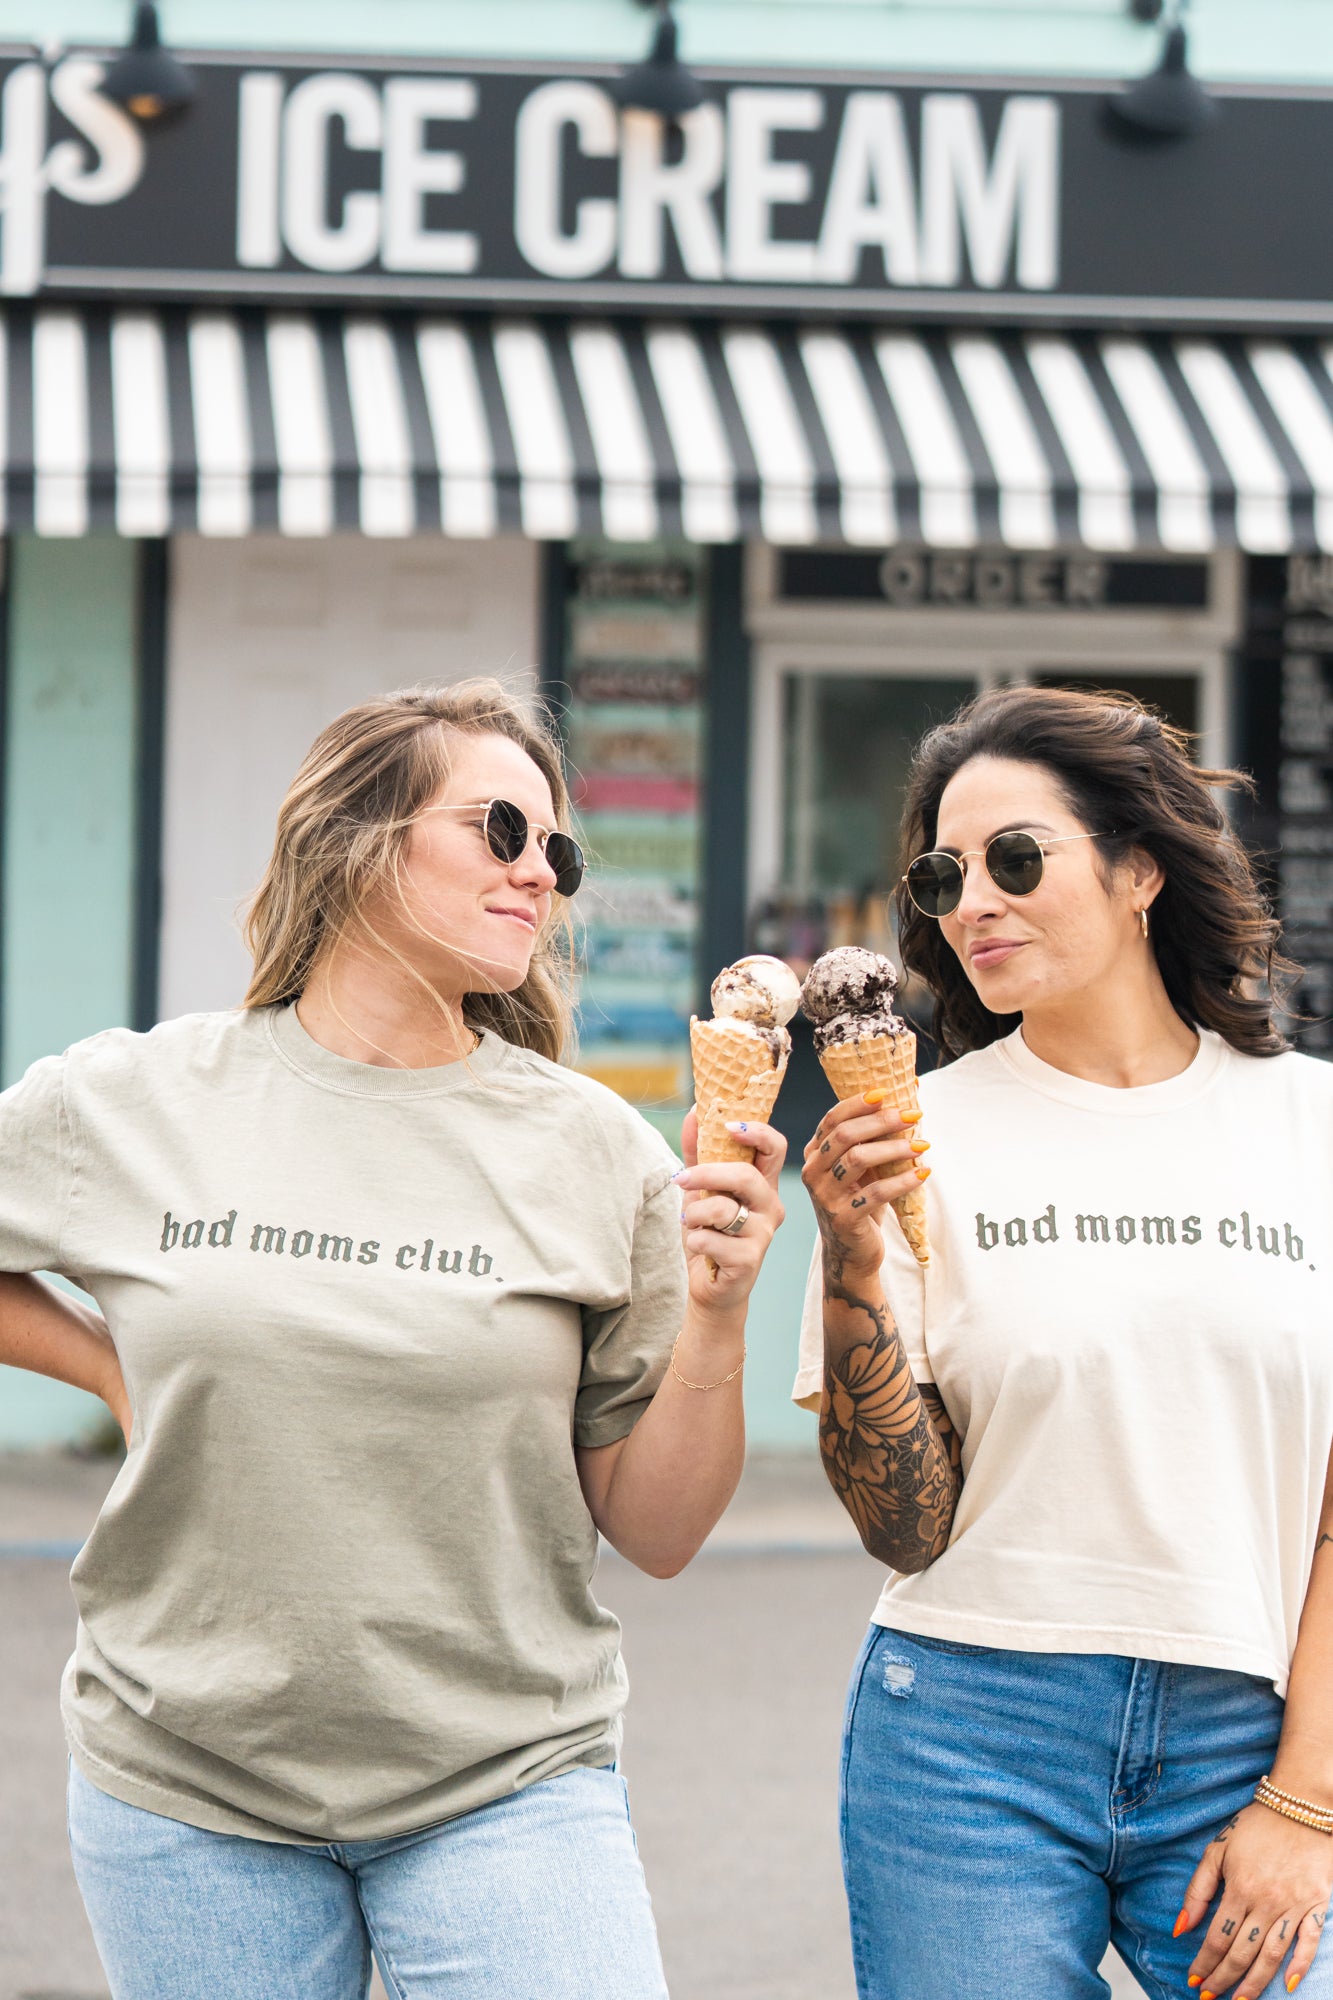 Bad Mom's Club (Front, Back) - Tee (Sandstone)